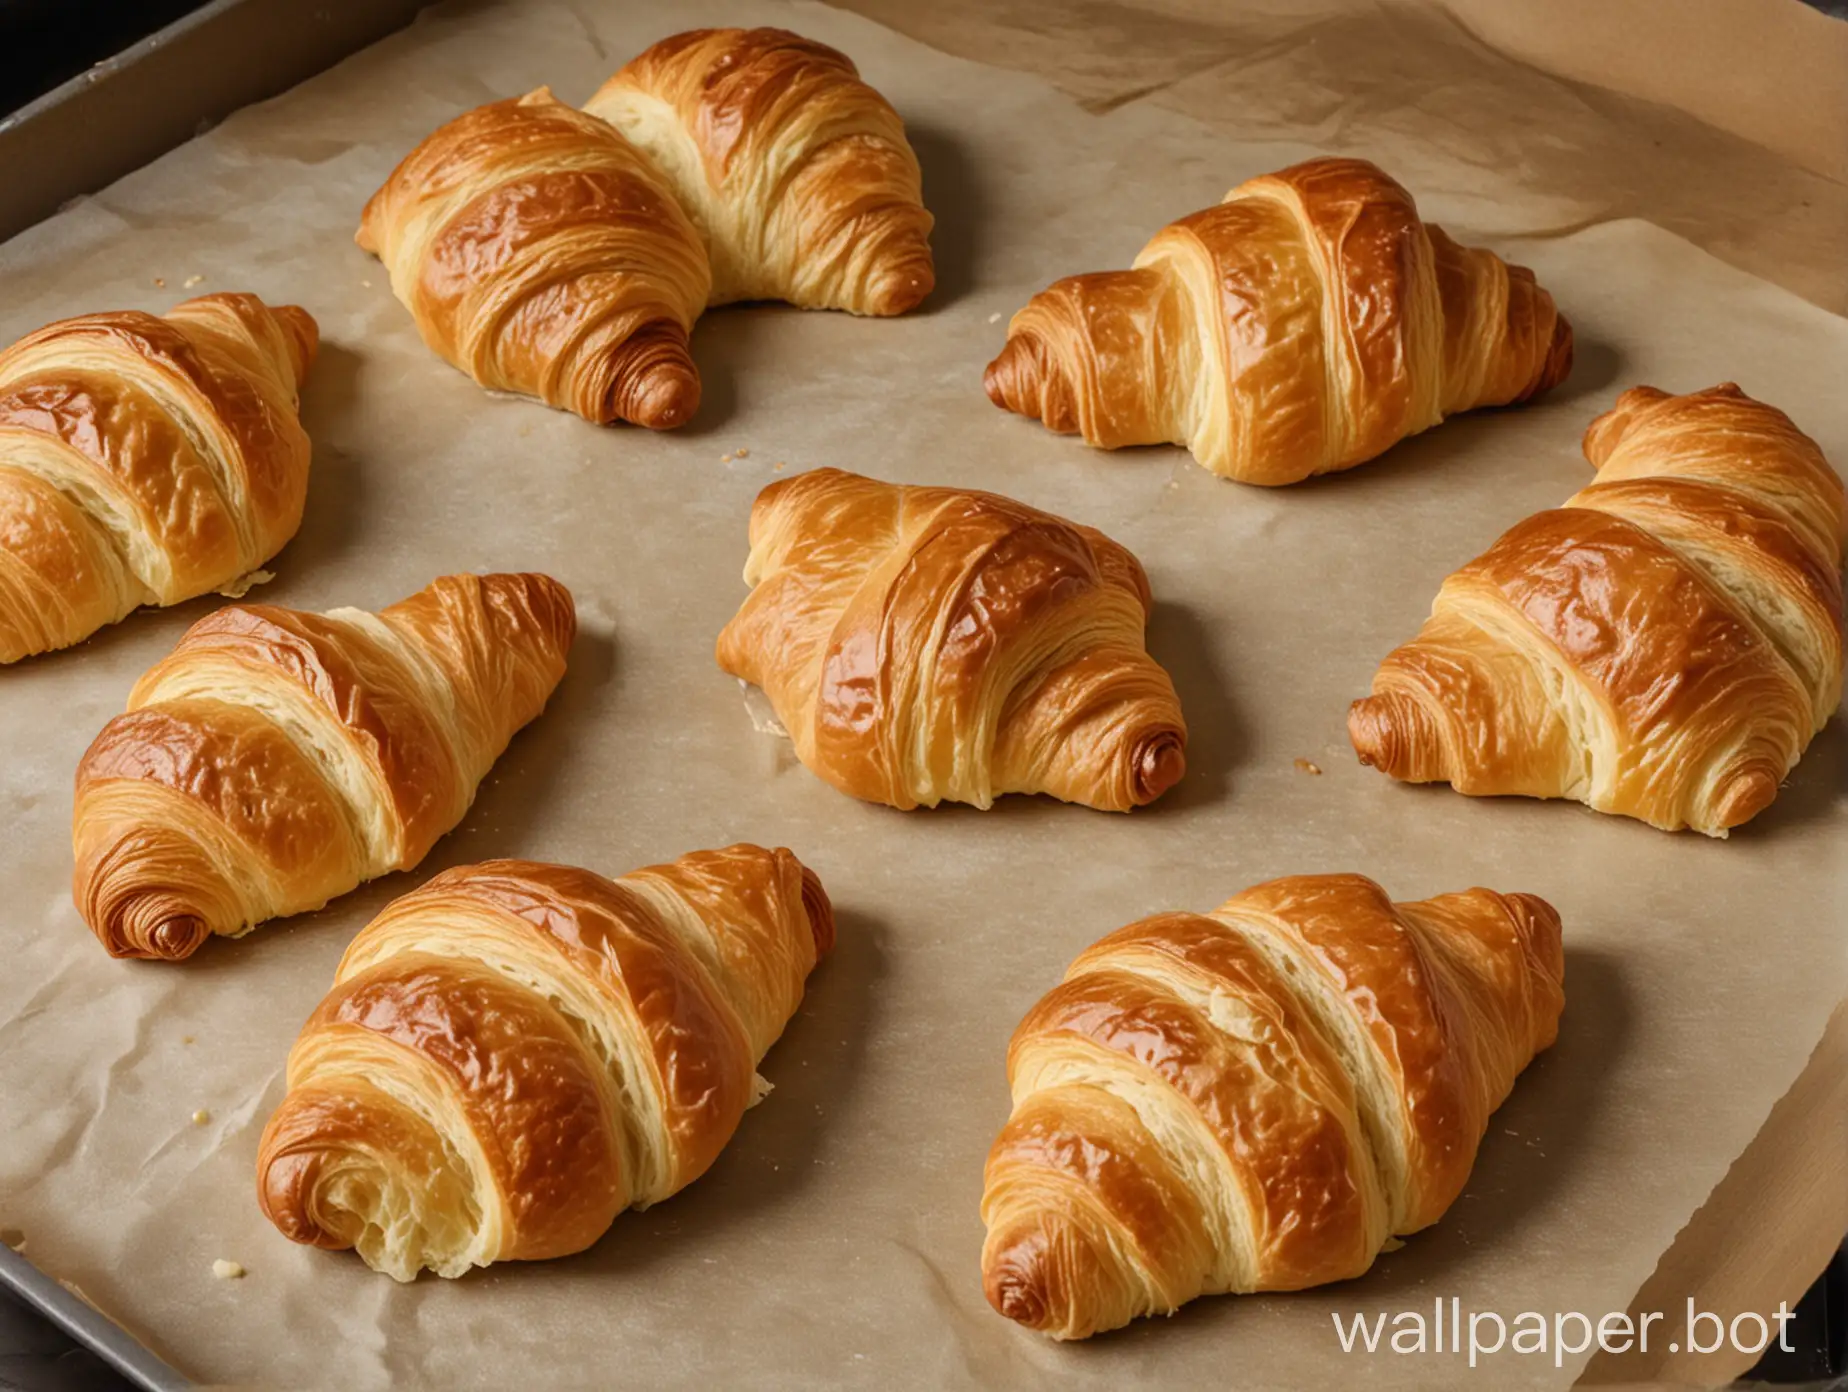 Fresh croissants are being baked.